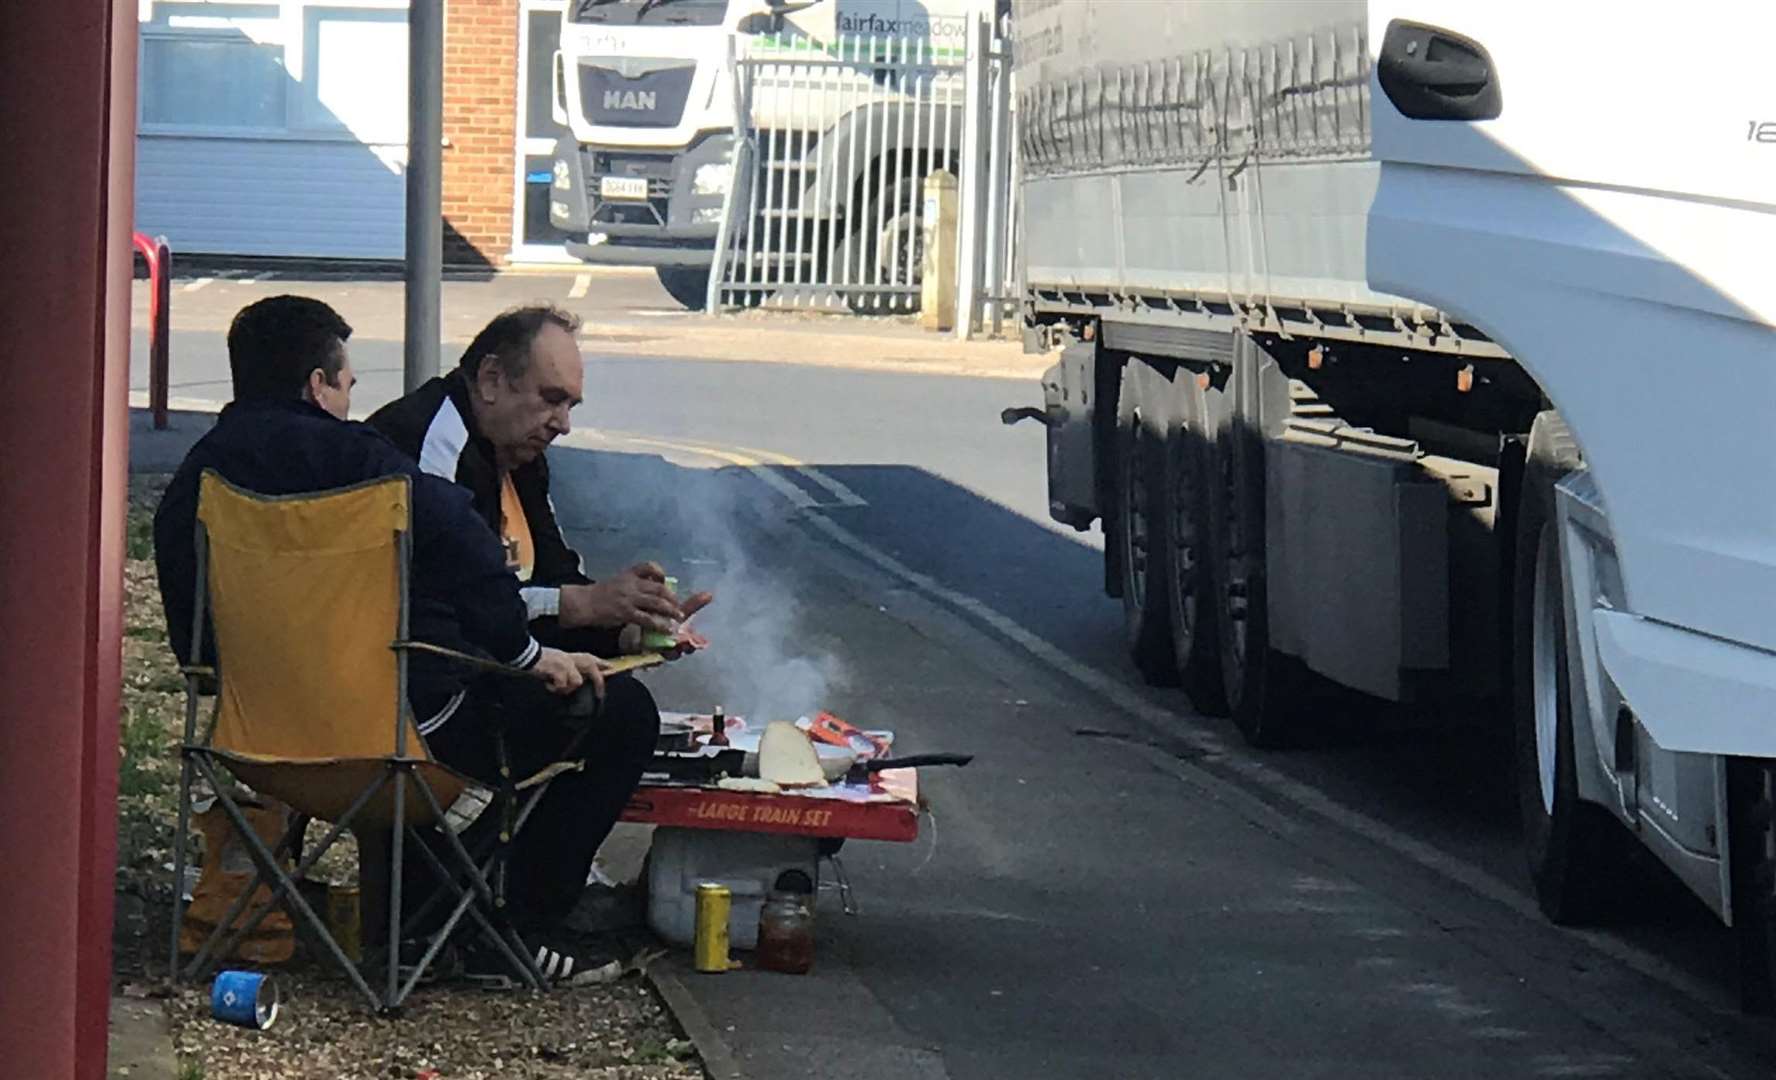 Drivers setting up a barbecue after pitching up is not an uncommon sight